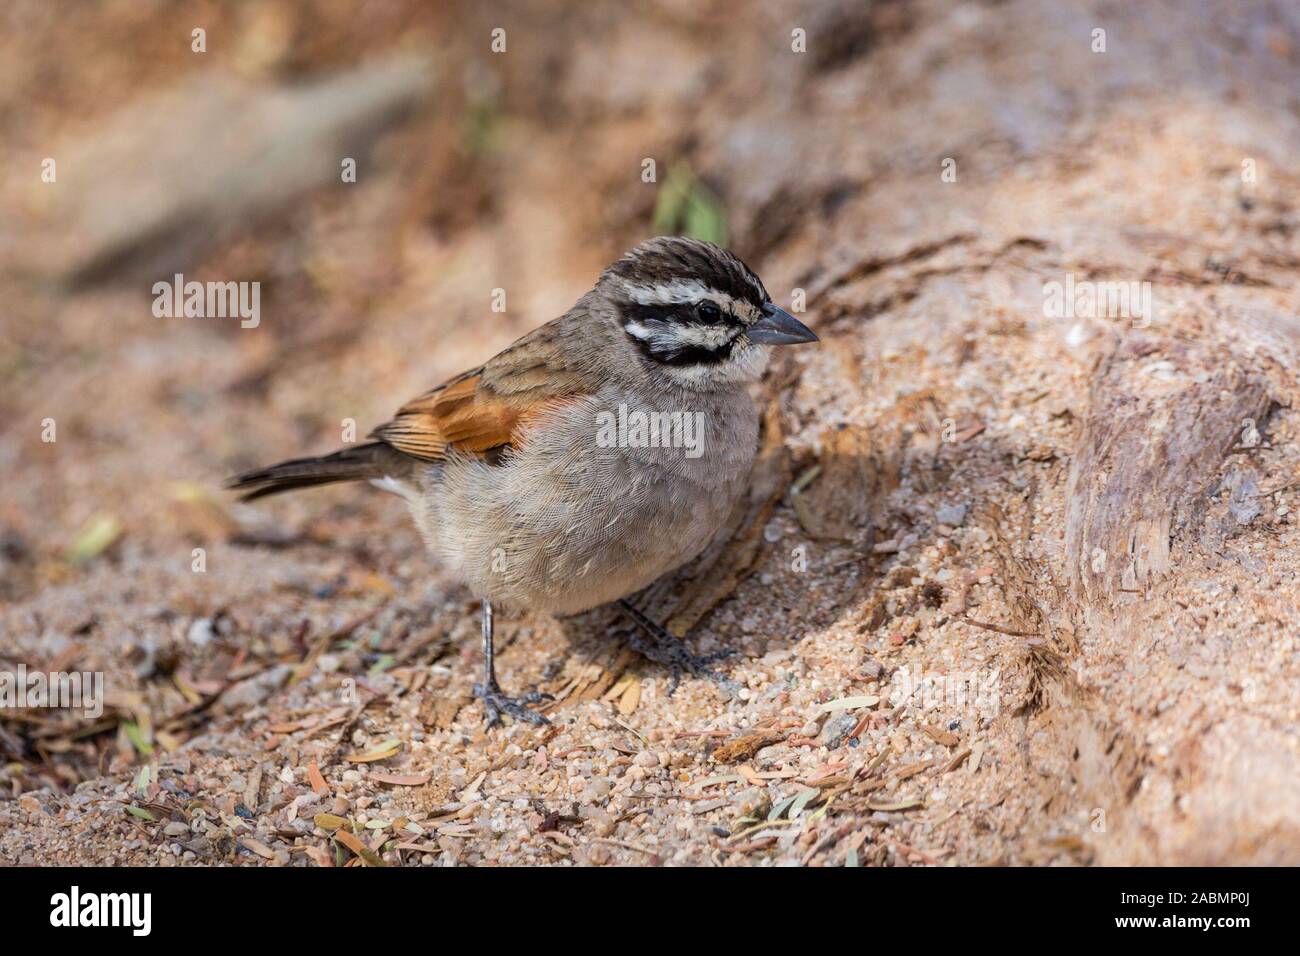 Close up of a Cape Bunting (Emberiza capensis) Stock Photo